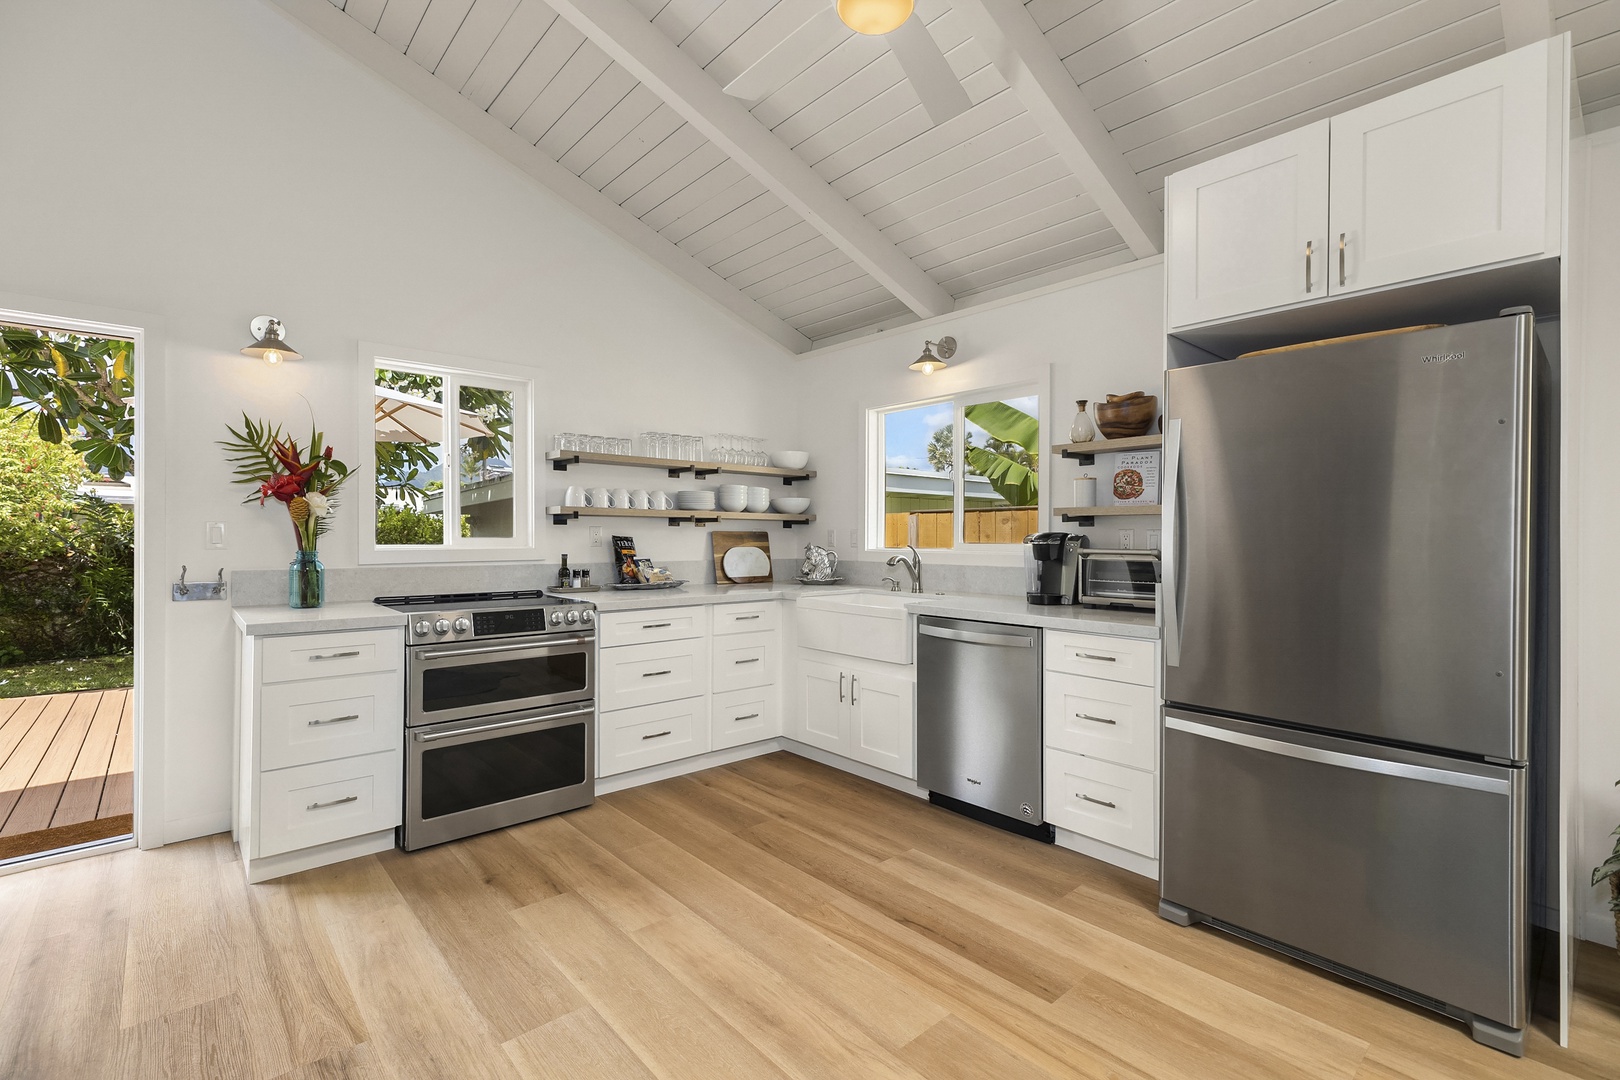 Kailua Vacation Rentals, Ranch Beach House - Modern kitchen with updated appliances